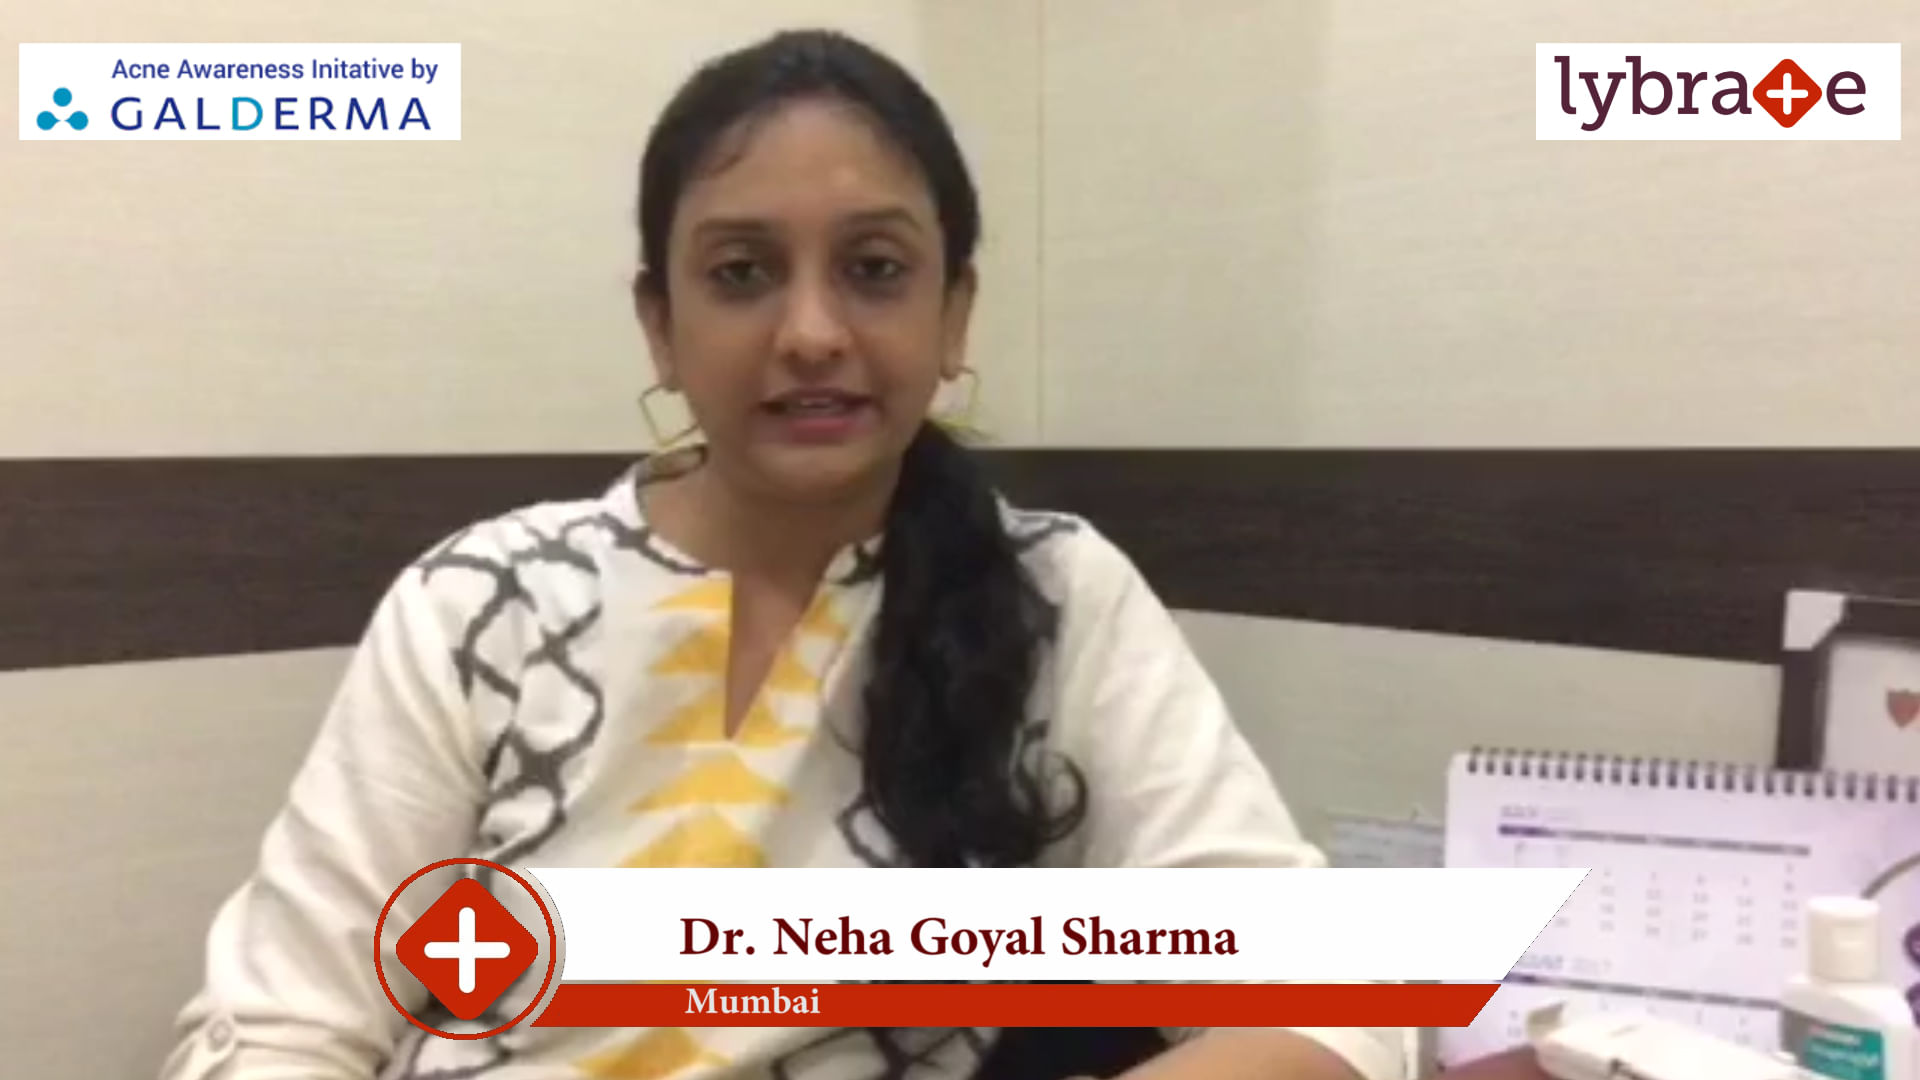 Lybrate | Dr. Neha Goyal Sharma speaks on IMPORTANCE OF TREATING ACNE EARLY